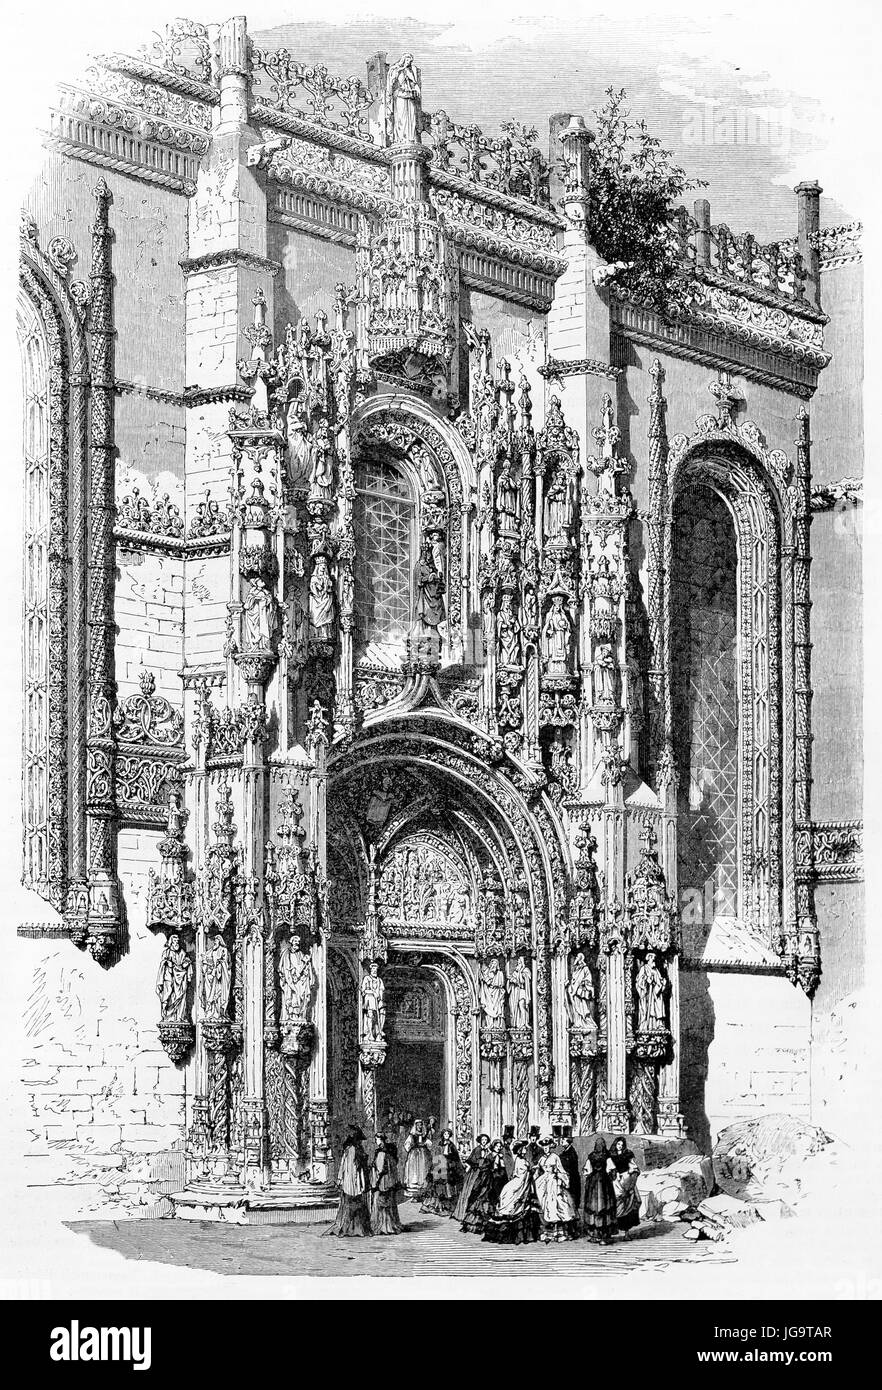 richly gothic decorated with statues and bas reliefs Jeronimos Monastery south big portal, Belém, Portugal. Ancient etching style art by Therond 1861 Stock Photo